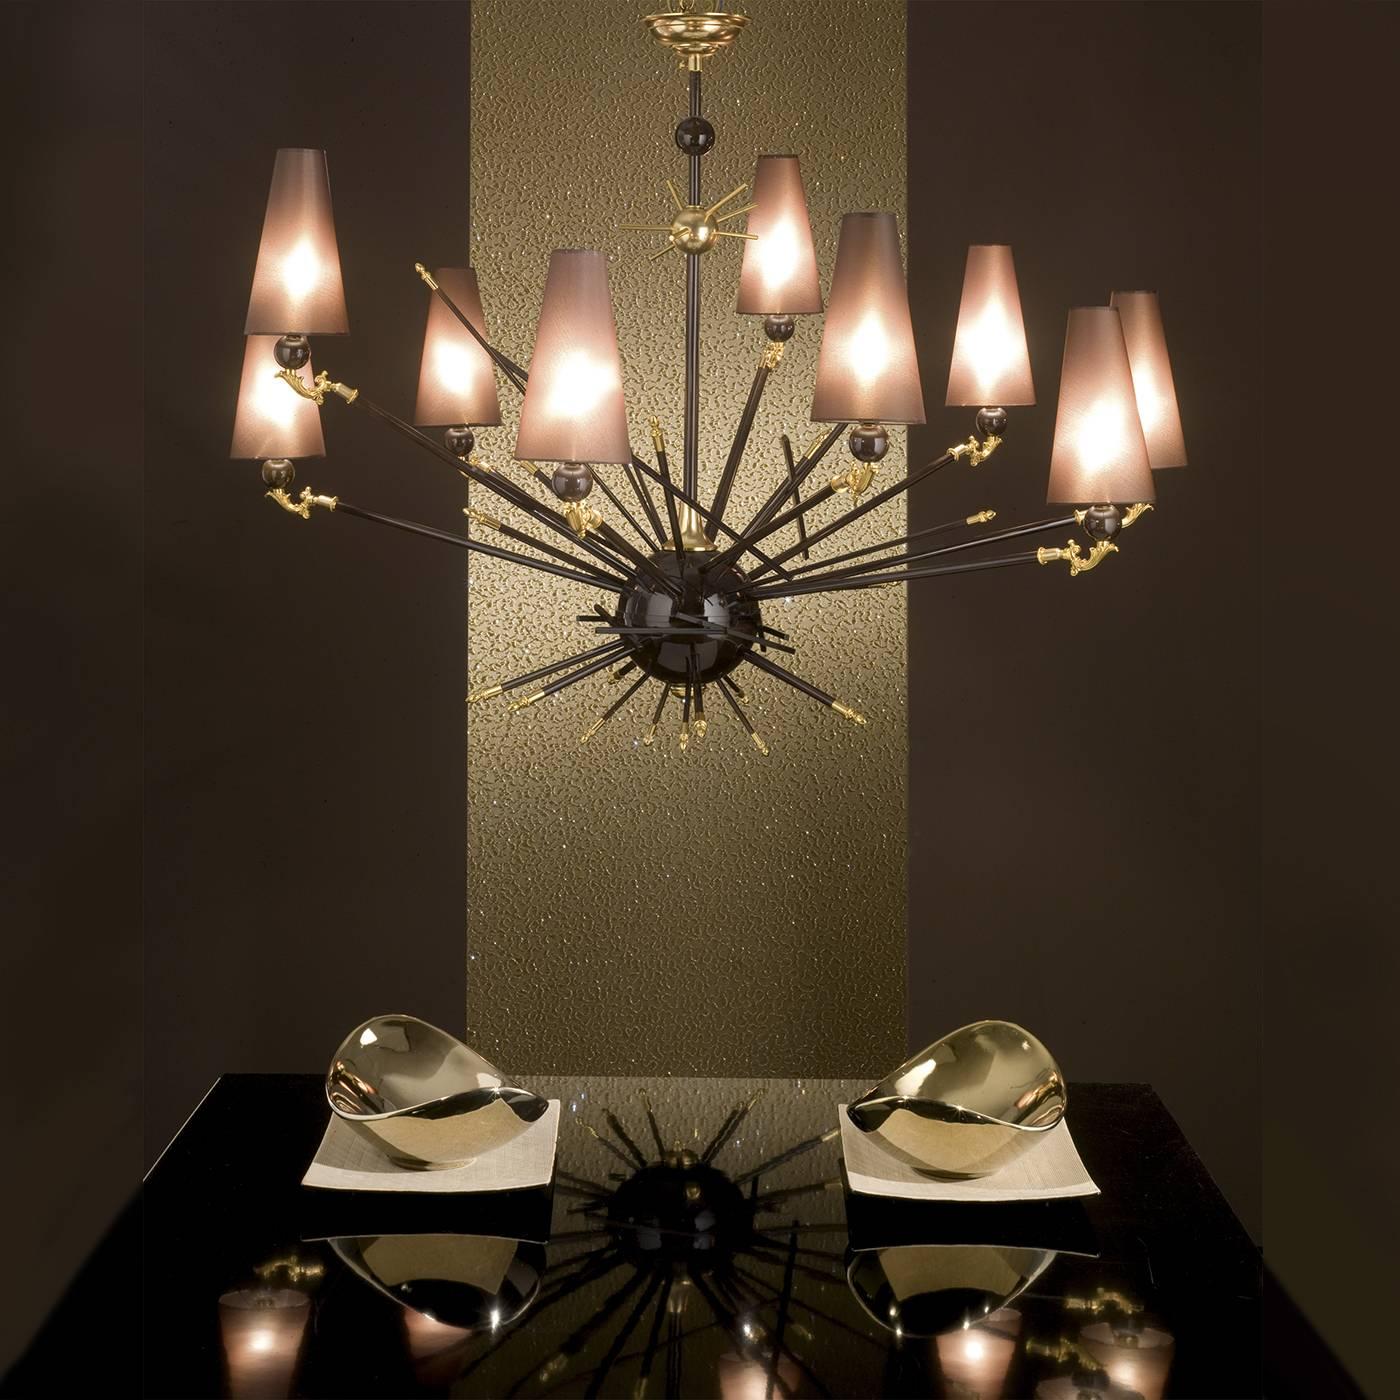 This exquisite piece of functional home decor can be paired with the matching Z468 sconce to make a striking statement in a dining room or living room. A spherical element is suspended from above and from it several arms extend, each one holding its